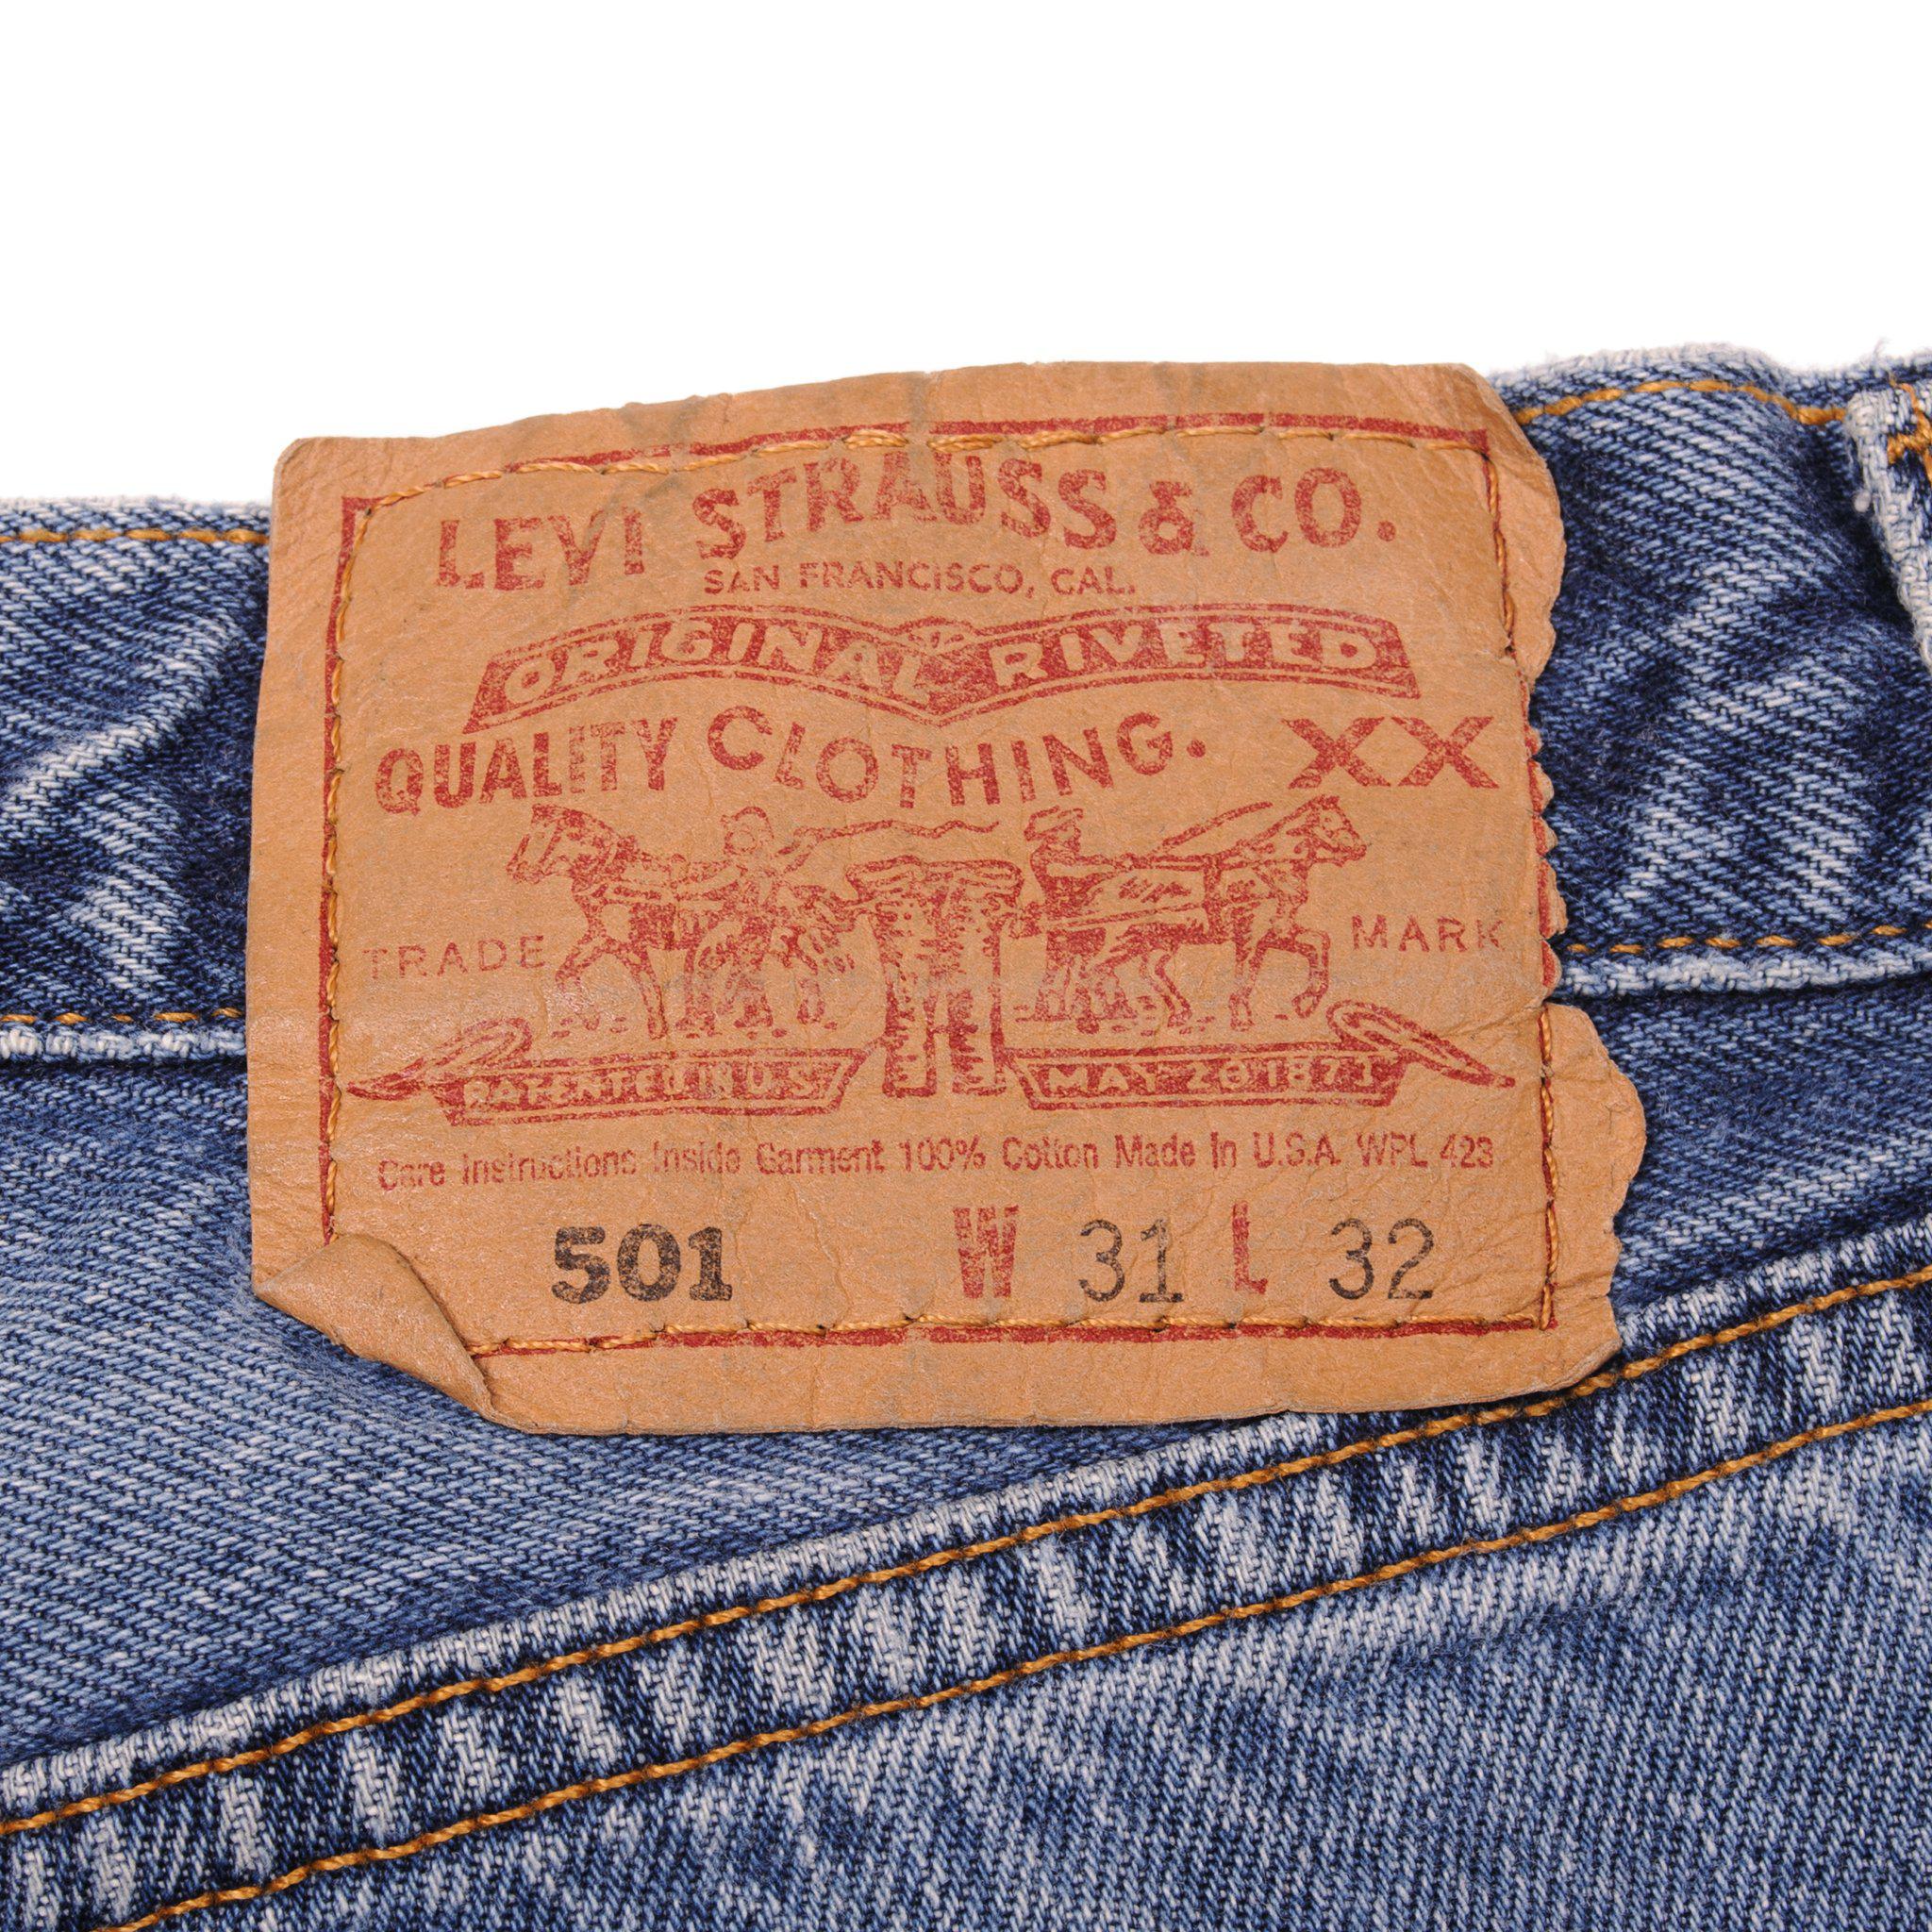 VINTAGE LEVIS 501 JEANS INDIGO 90s WOMAN SIZE W30 L31 MADE IN USA – Vintage  rare usa